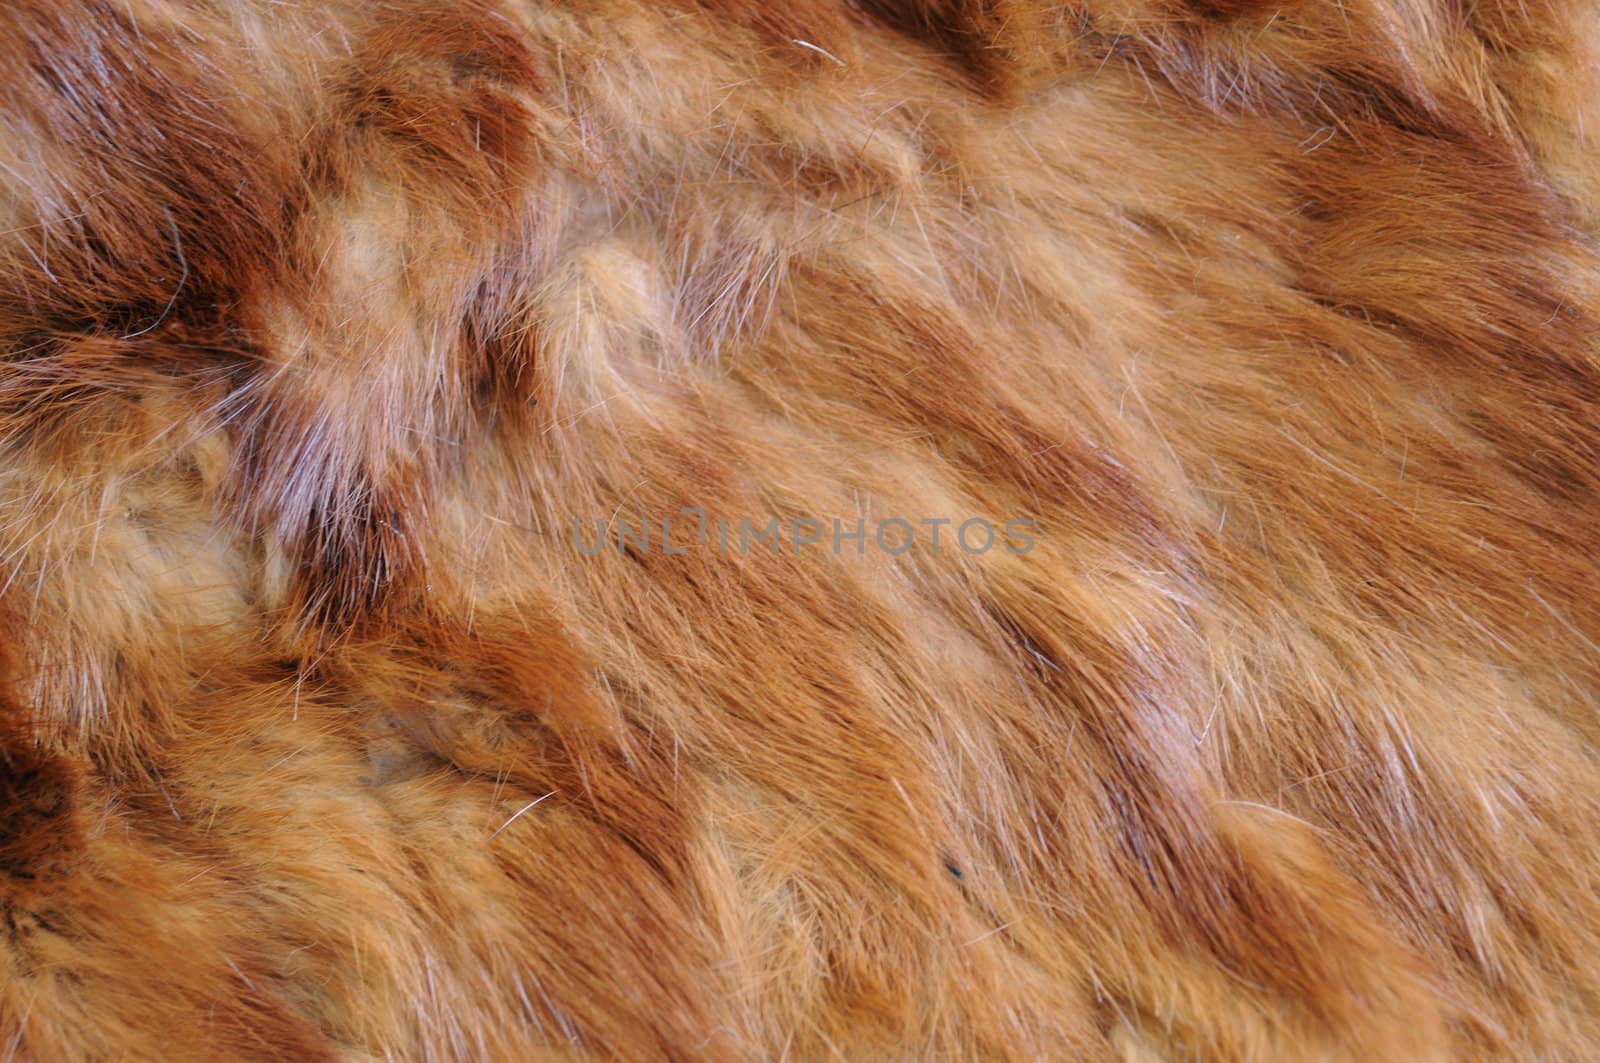 A background of soft red-brown fur in a close-up shot to highlight the texture of the pelt.